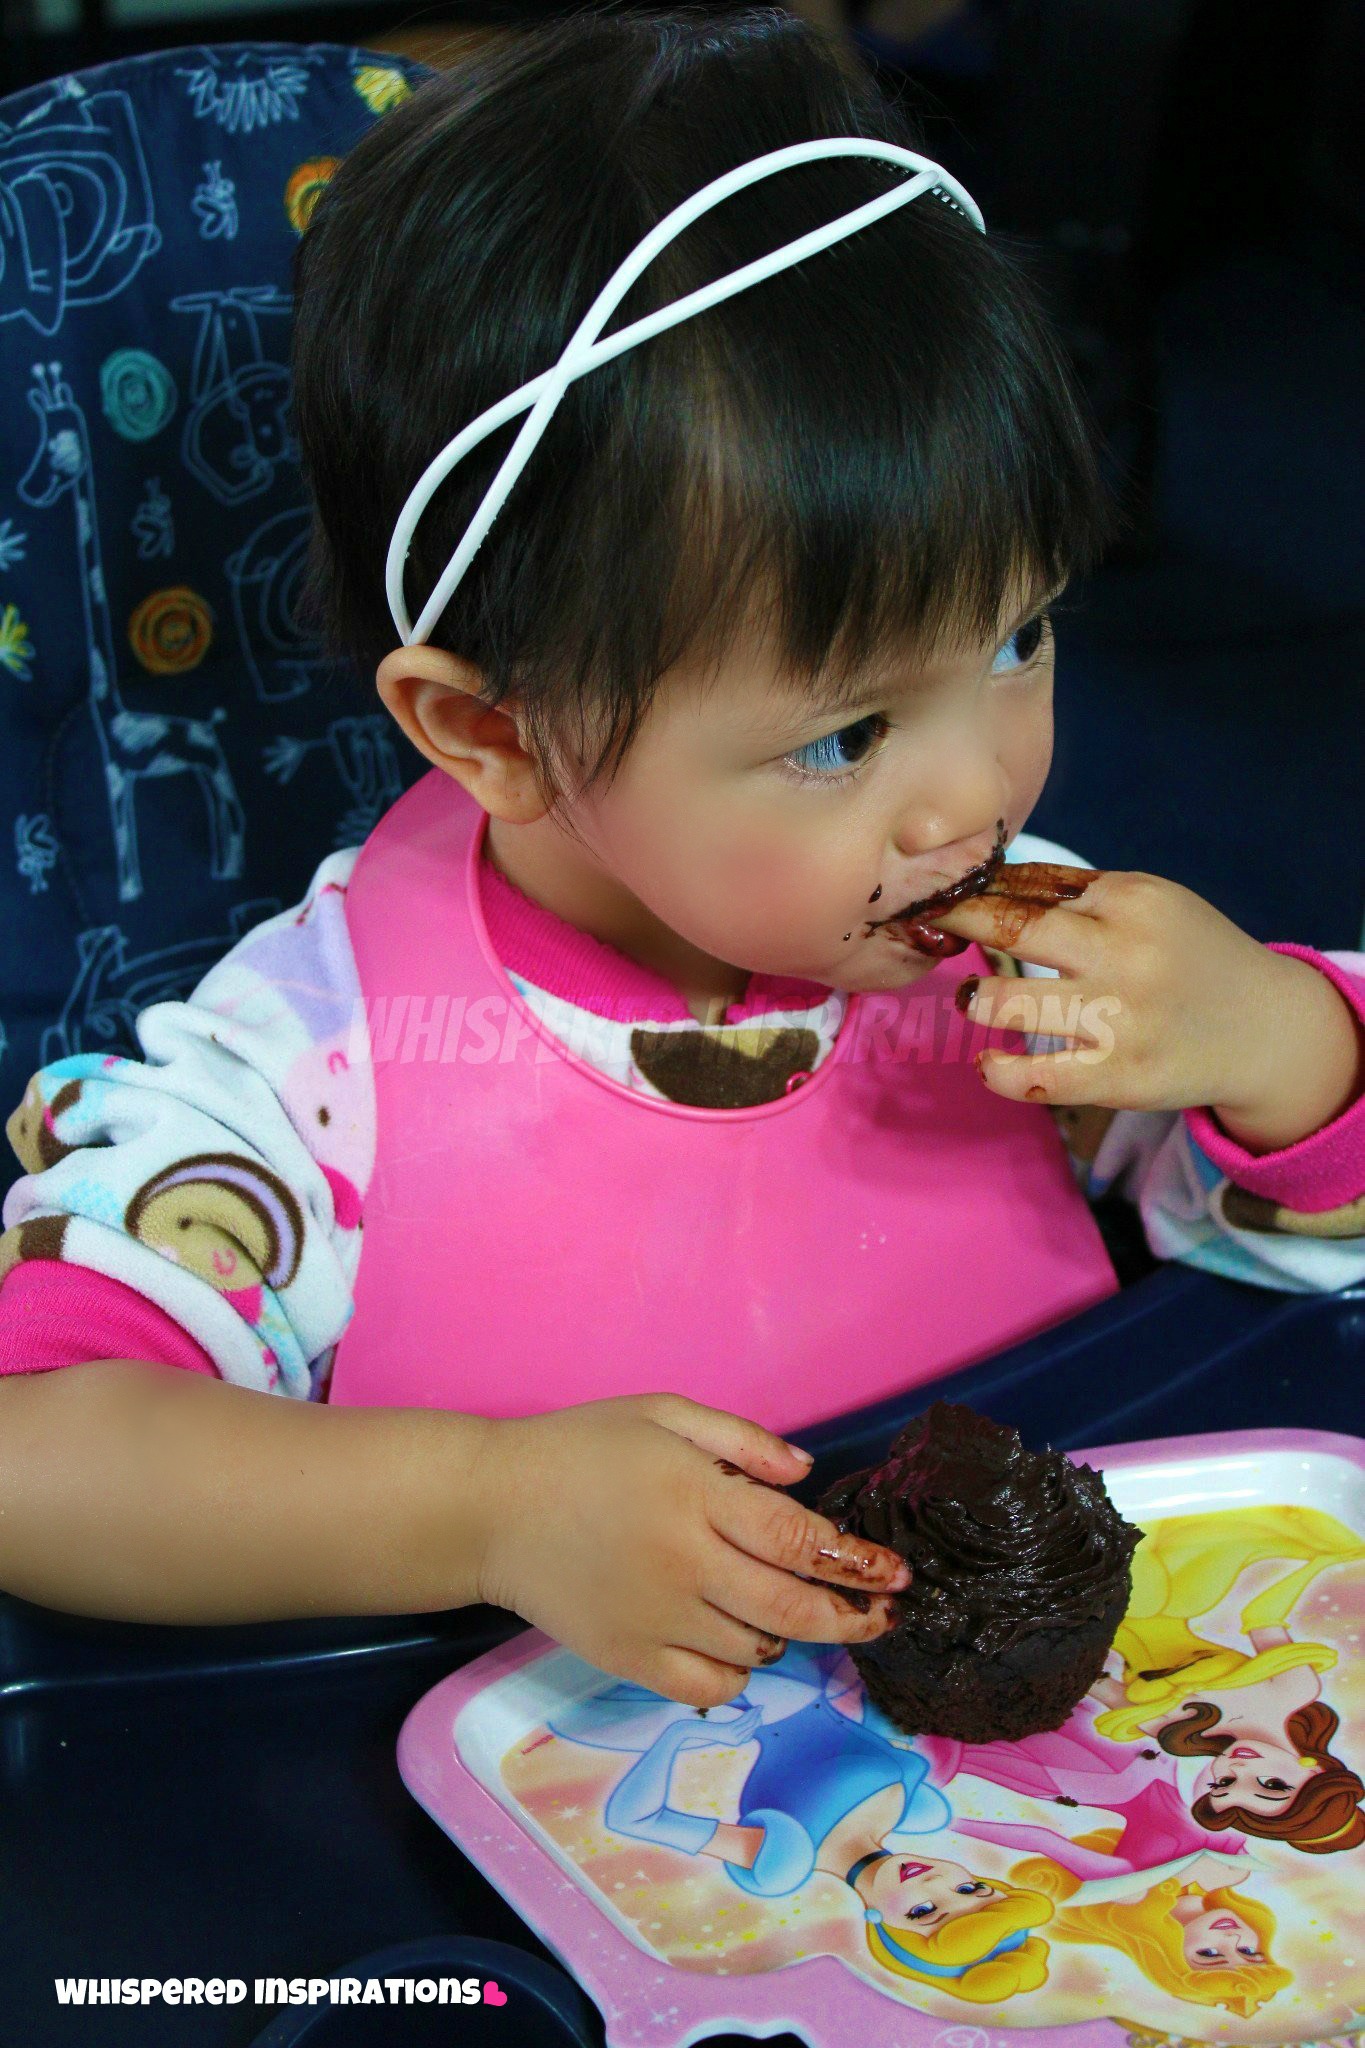 Mimi, a little girl, licking her little fingers while eating a chocolate cupcake.